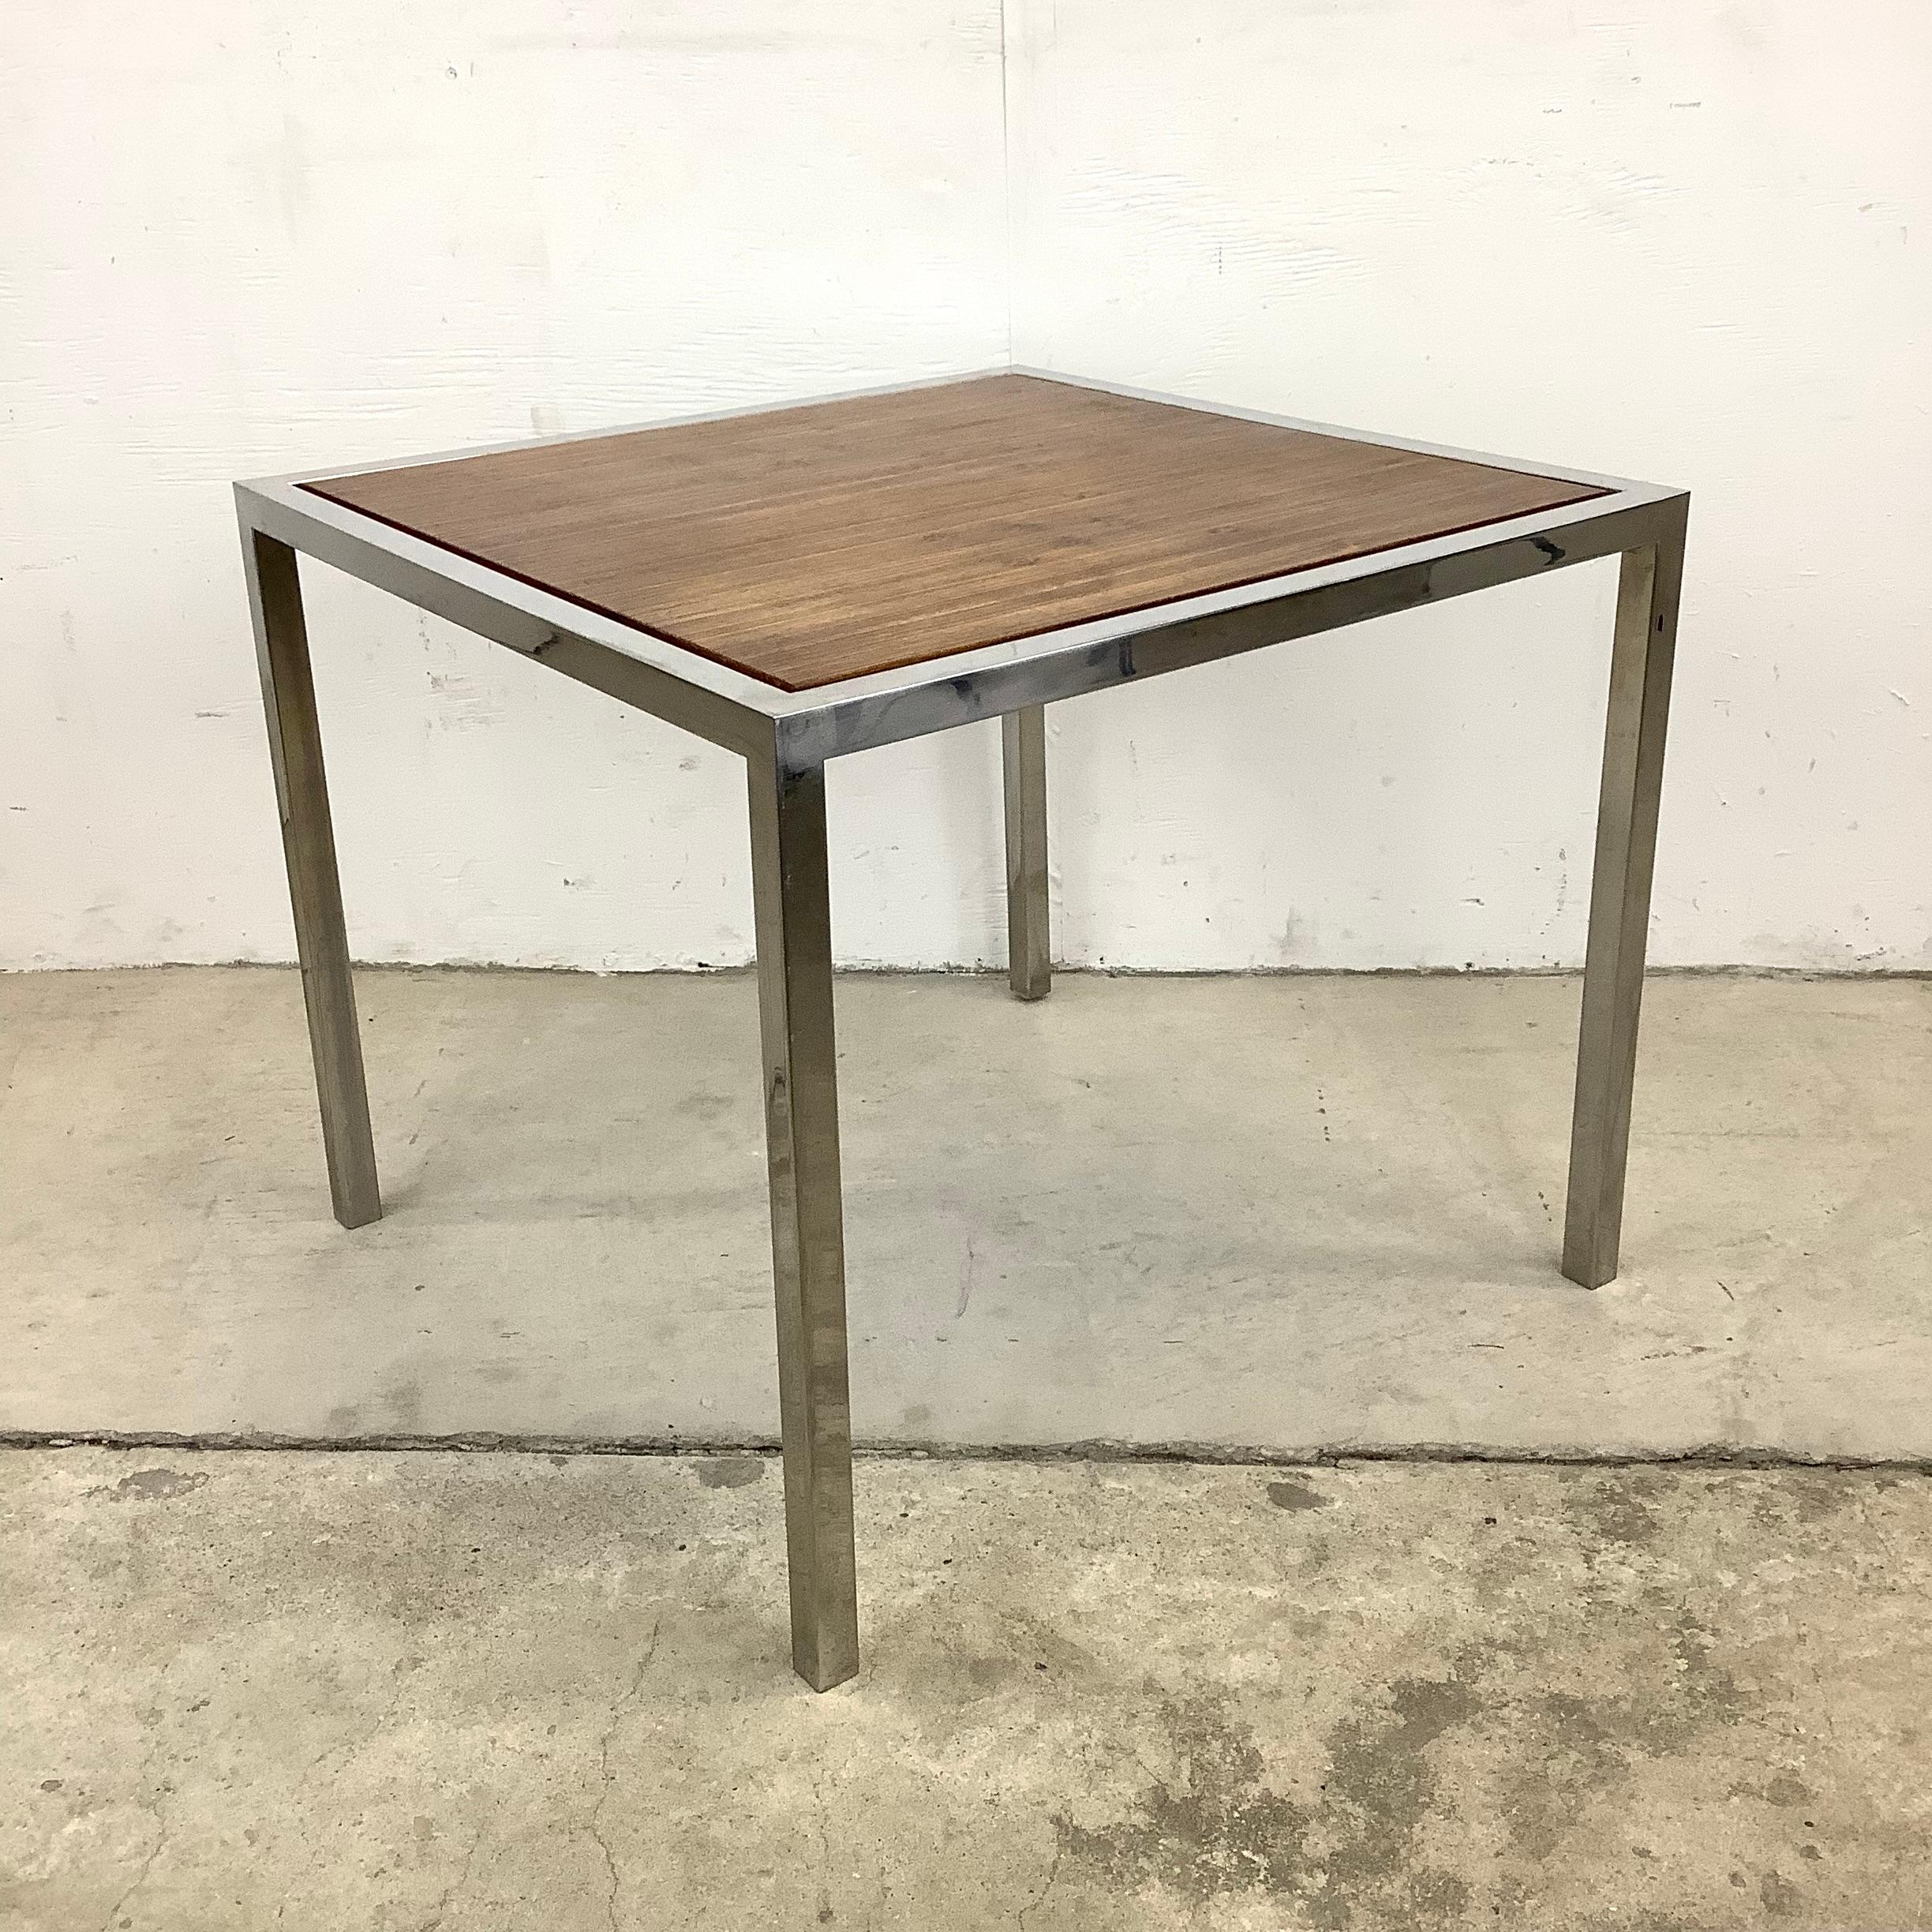 This simple yet striking square mid-century side table features a rosewood finish wood table top with modern chrome frames. Perfect size end table for sofa side table or as a lamp table. See photos-

Dimensions: 24w 24d 20h

Condition: age